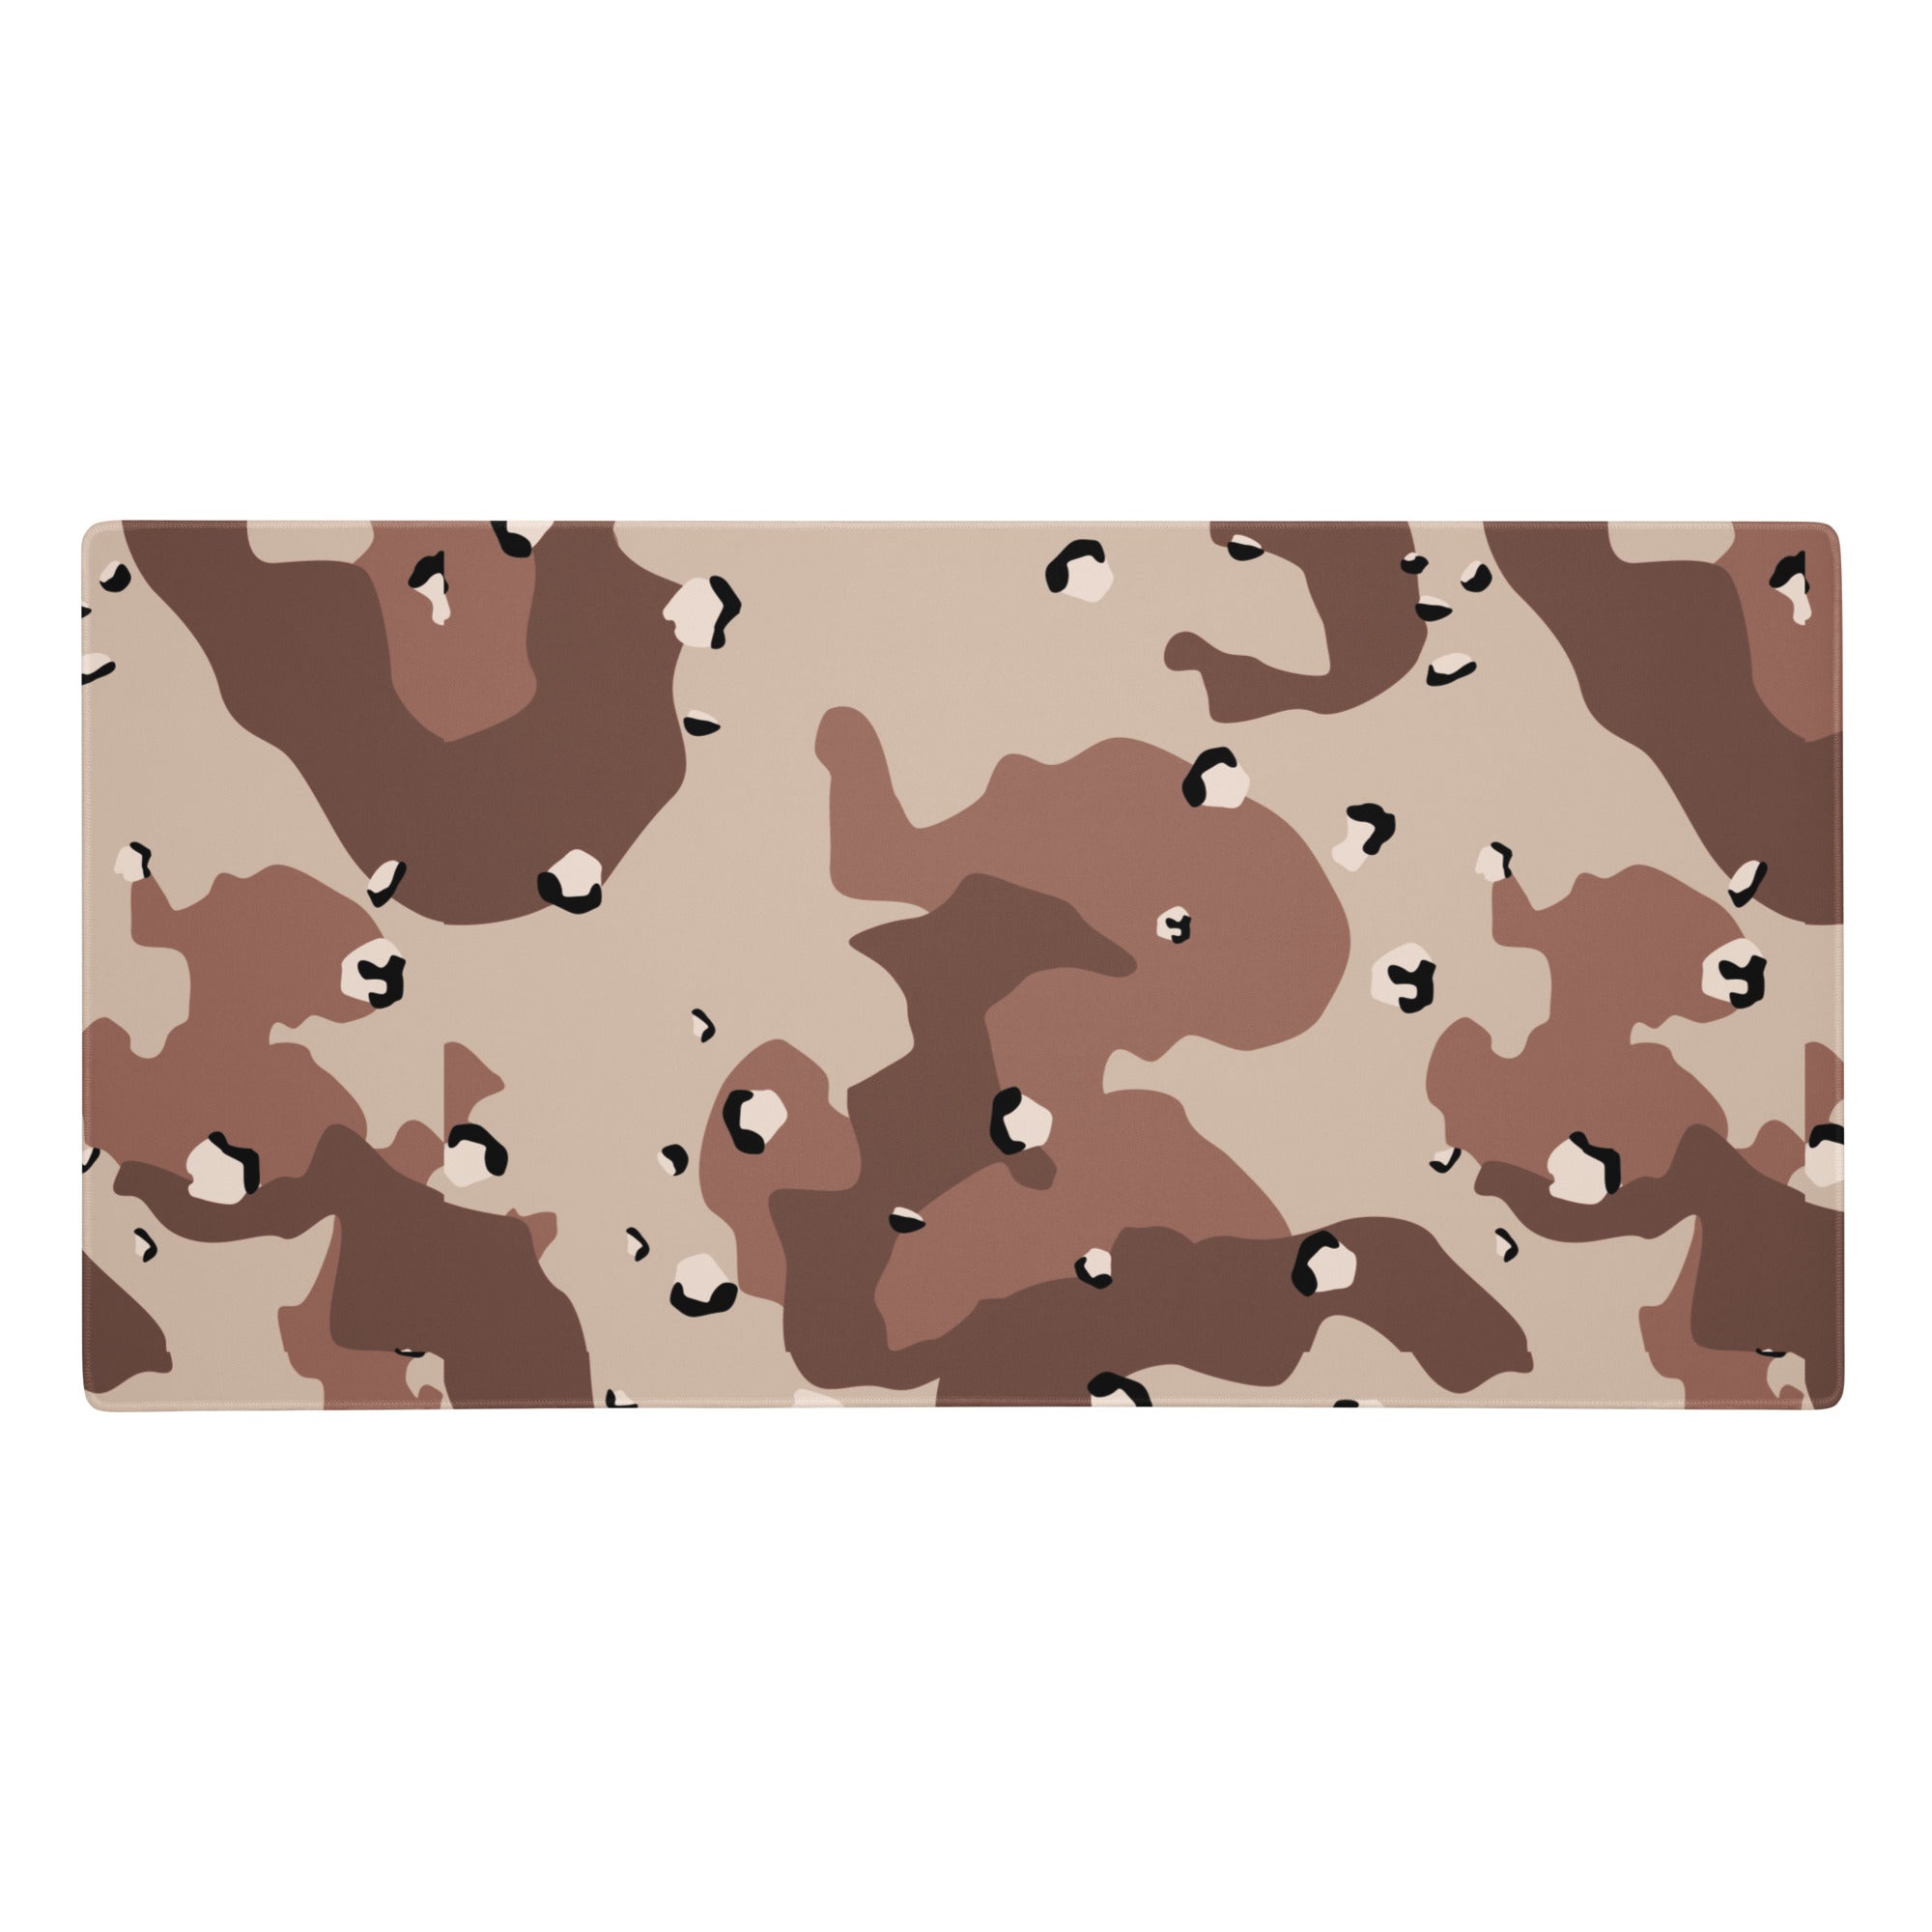 Desert Camouflage Pattern Gaming Mouse Pad